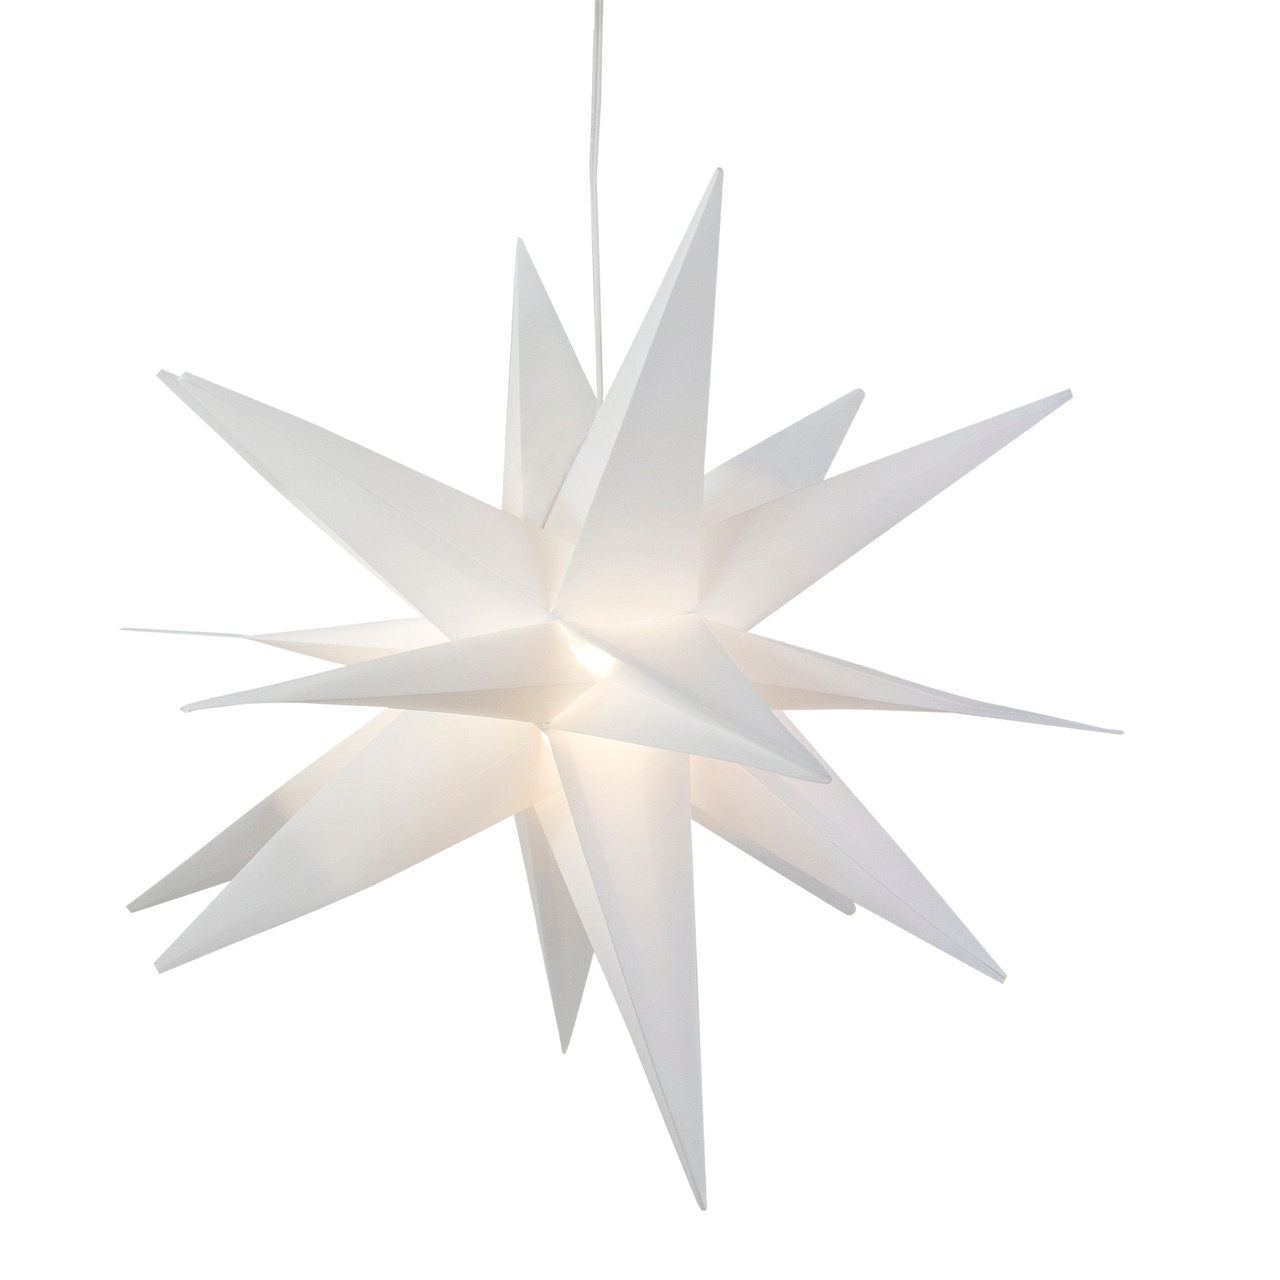 Moravian Christmas Stars: Not Just a Holiday Decoration